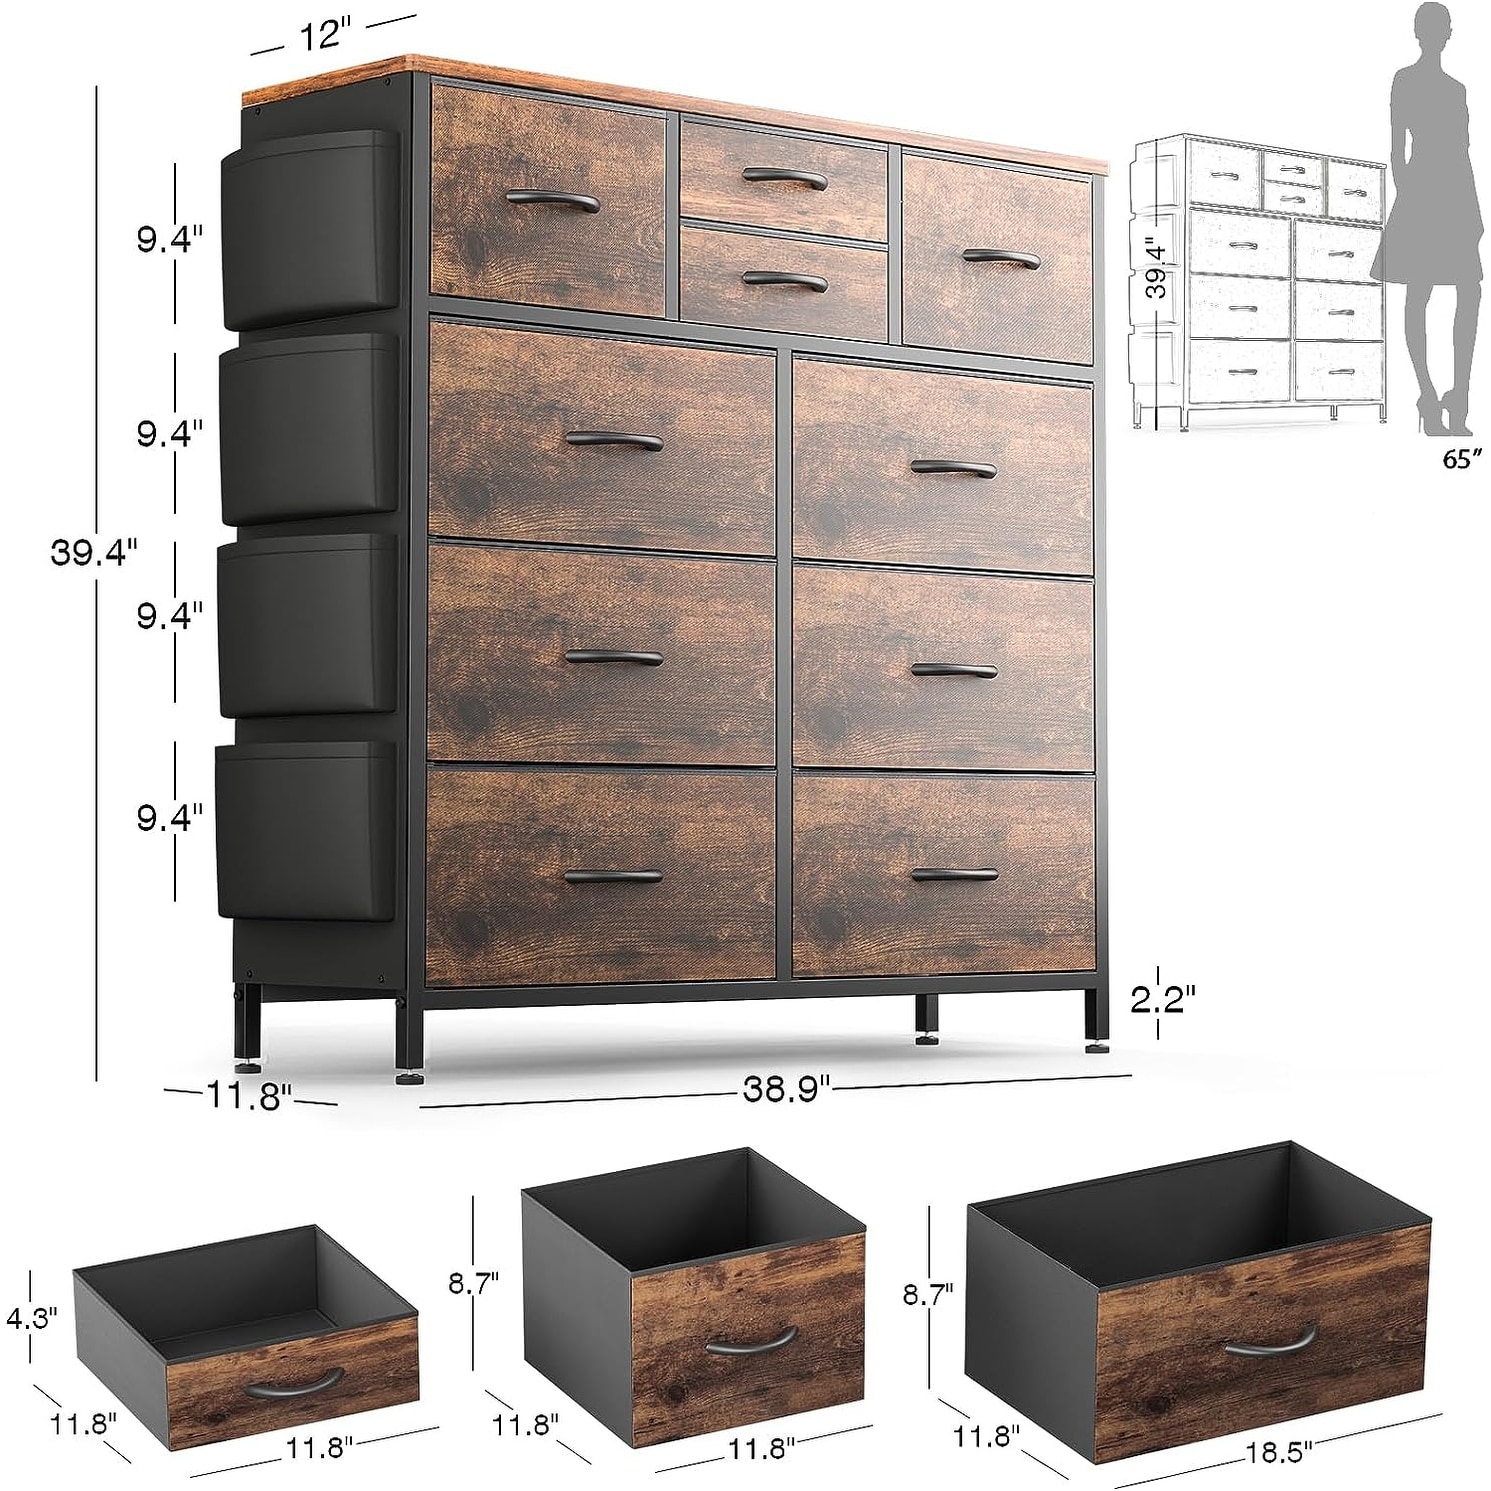 https://ak1.ostkcdn.com/images/products/is/images/direct/1cdaf4a33b93a4d4a113a9e5a6eaae48e8c36994/10-Drawer-Dresser-Closet-Storage-Tower-Organizer-Unit-for-Bedroom.jpg